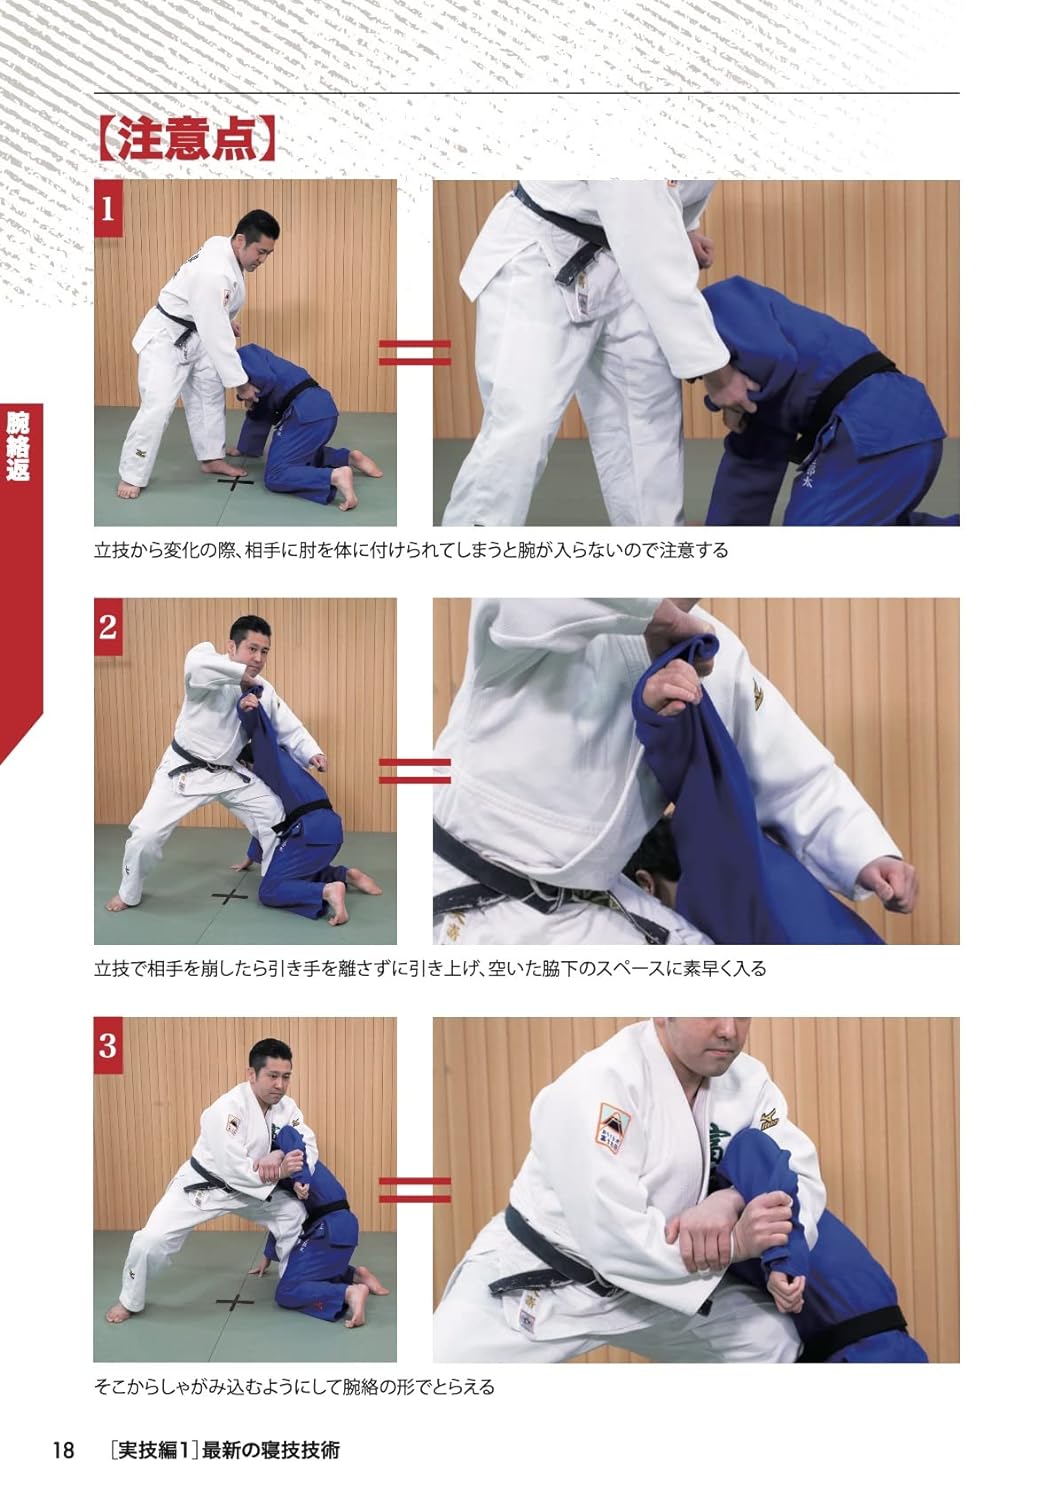 A Completely new Judo Ground Technique Textbook (With QR Codes) by Yudai Yazaki